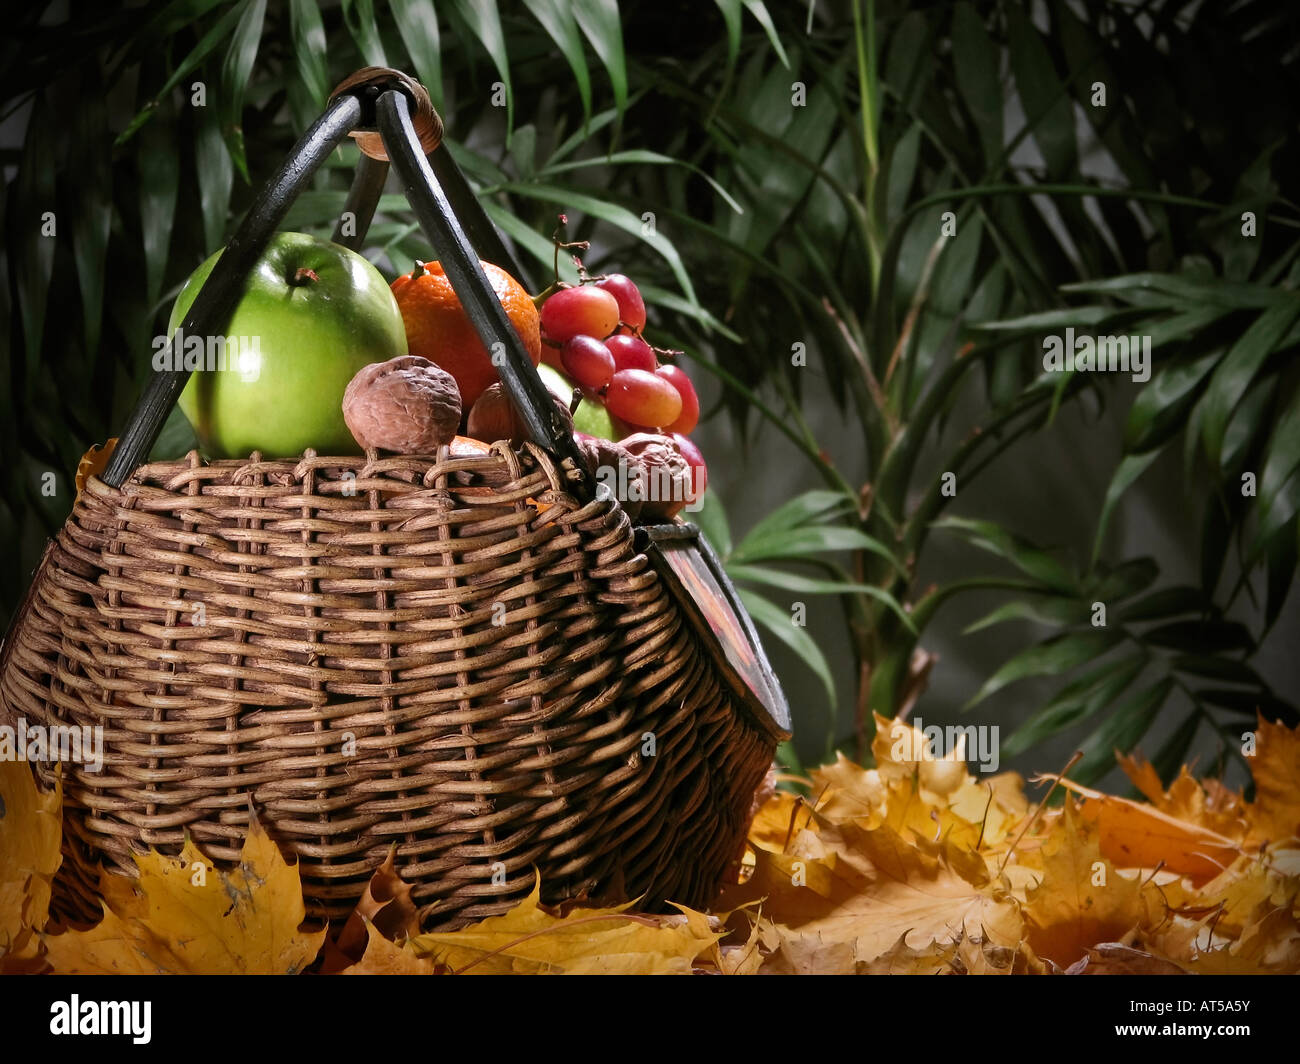 Close up of a wicker basket with fruits photo studio nobody none from front none nobody aestetic horizontal blurred blurry background hi-res Stock Photo